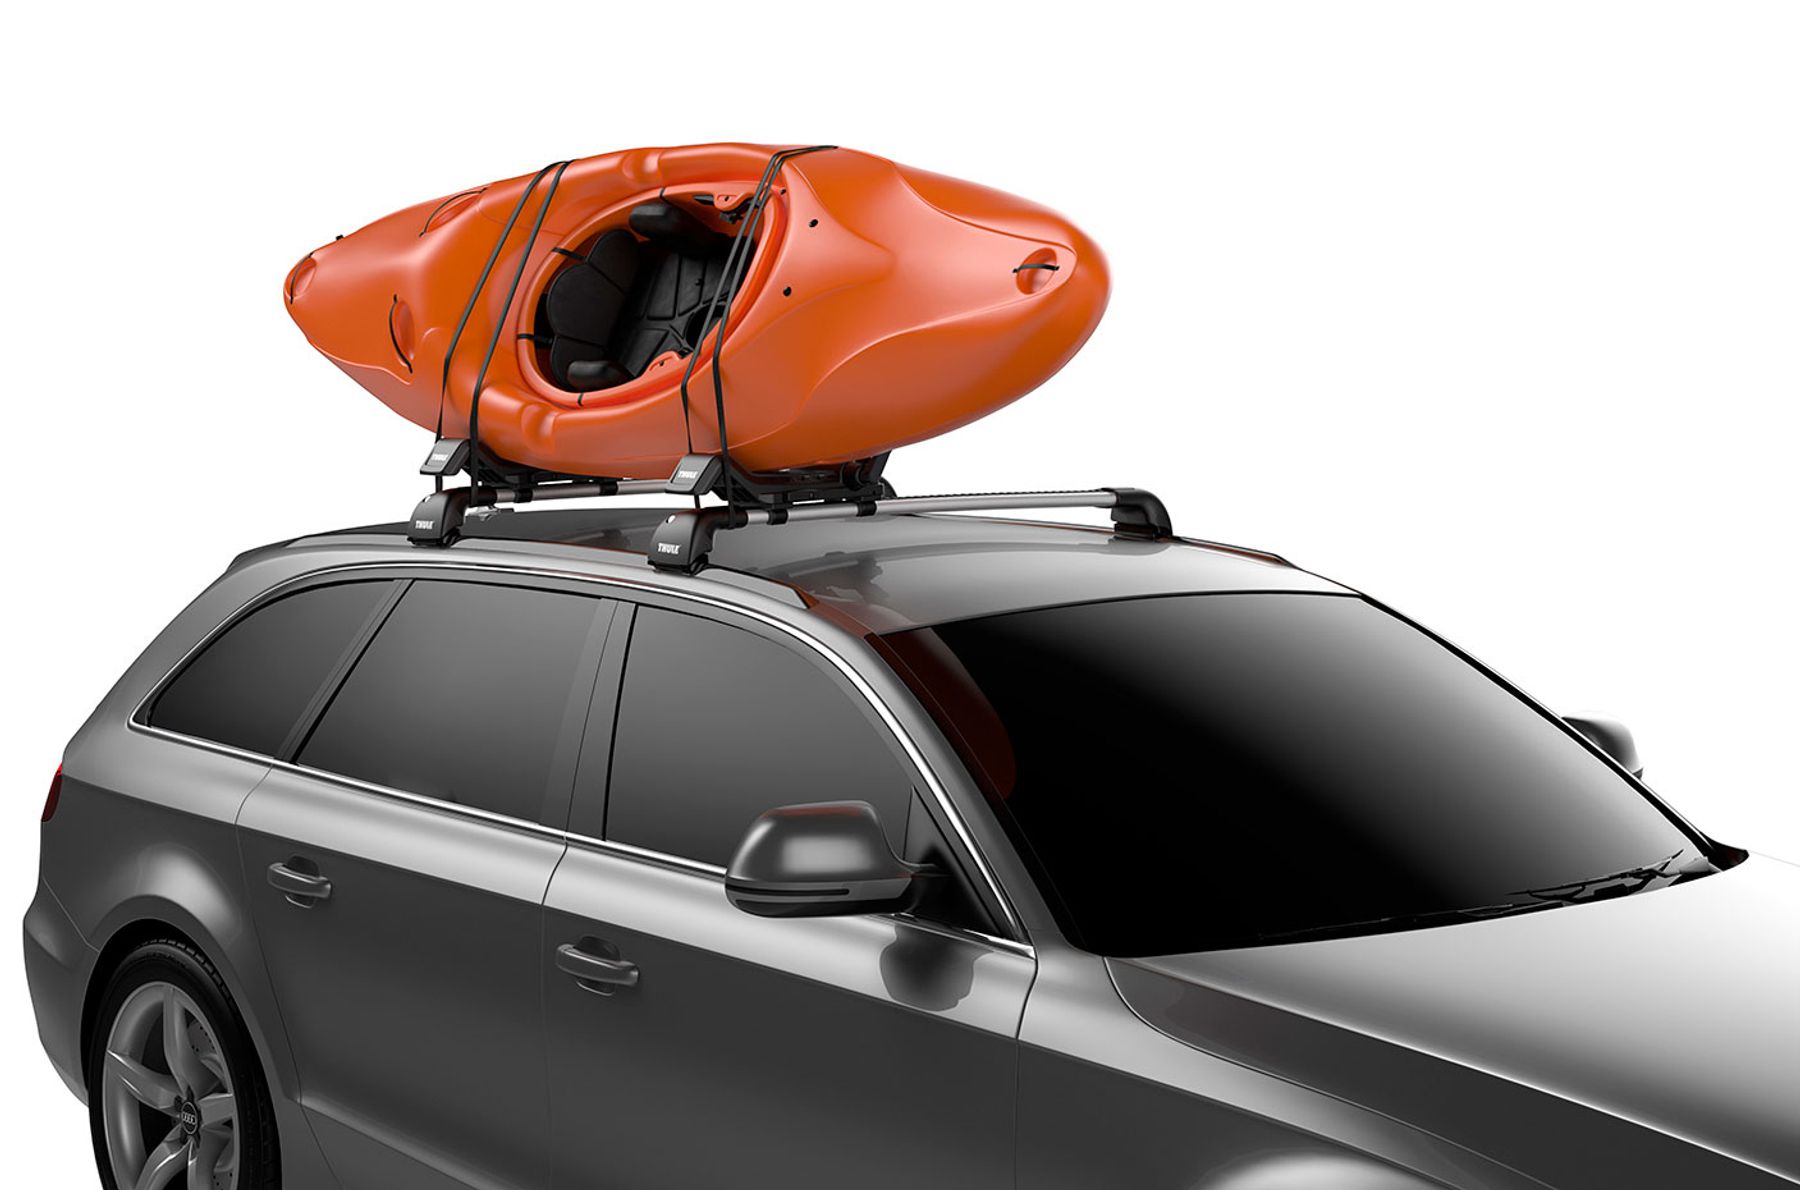 Thule Hull-a-Port XT on car and kayak on top